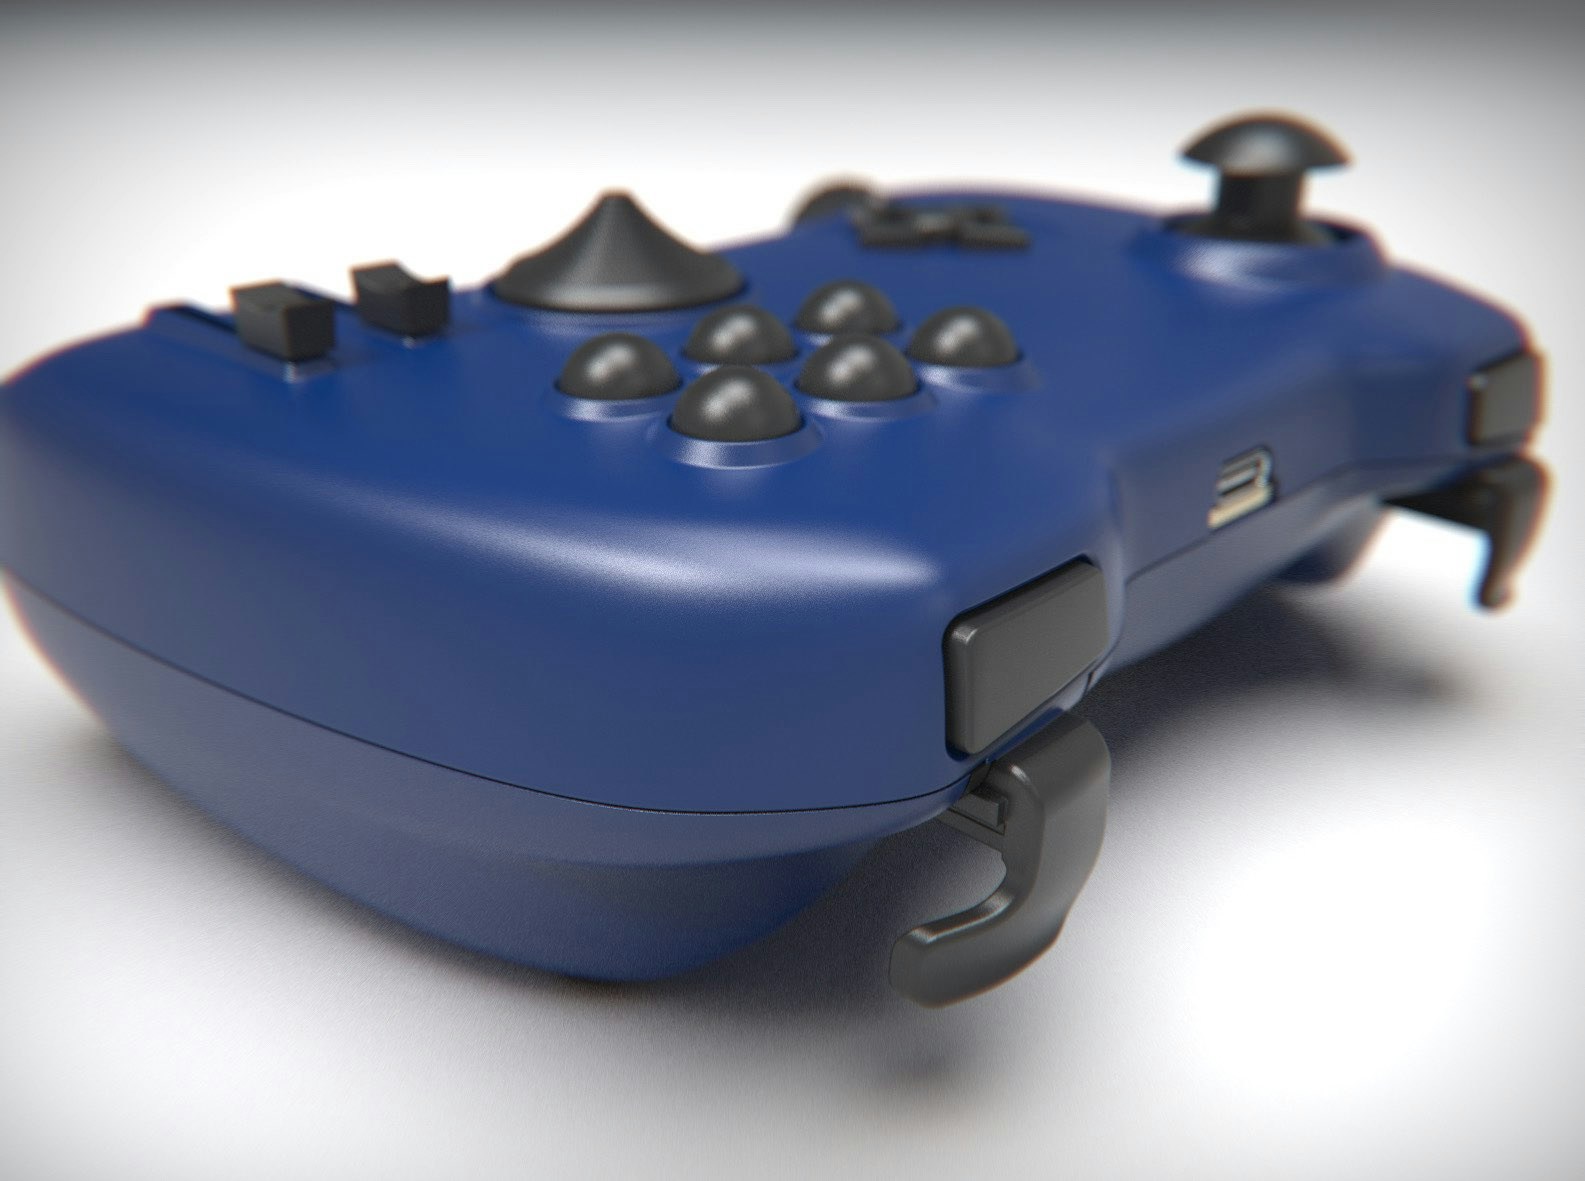 Introducing the Yawman Arrow - A new Compact Controller for Flight Simulation